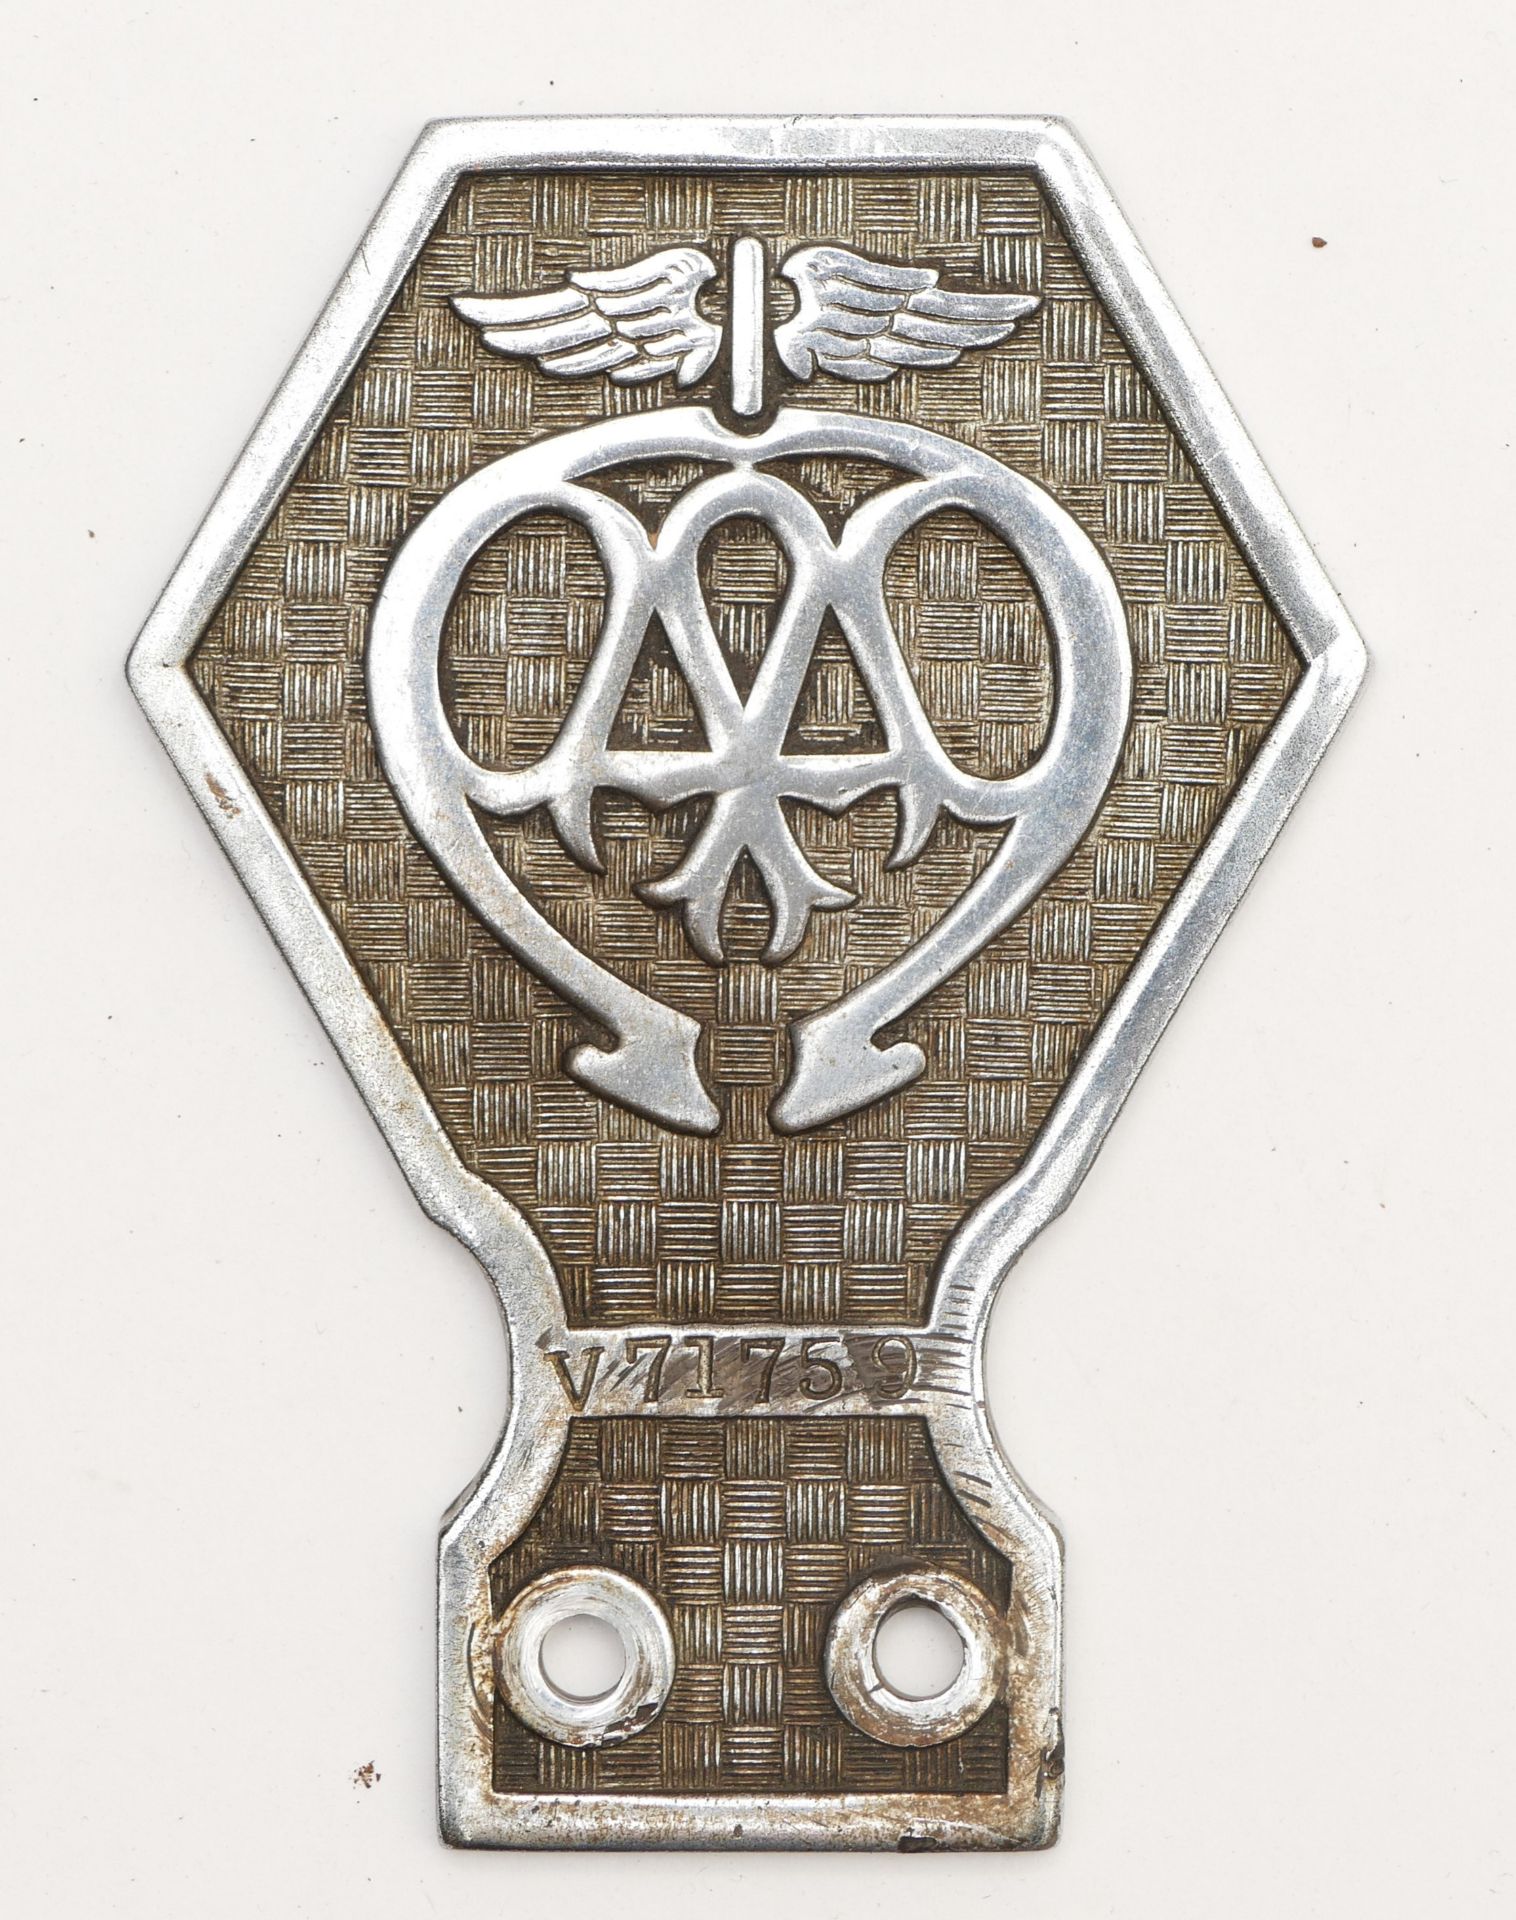 An AA chrome commercial vehicle badge, with basket weave background, V 71759, c.1930's.